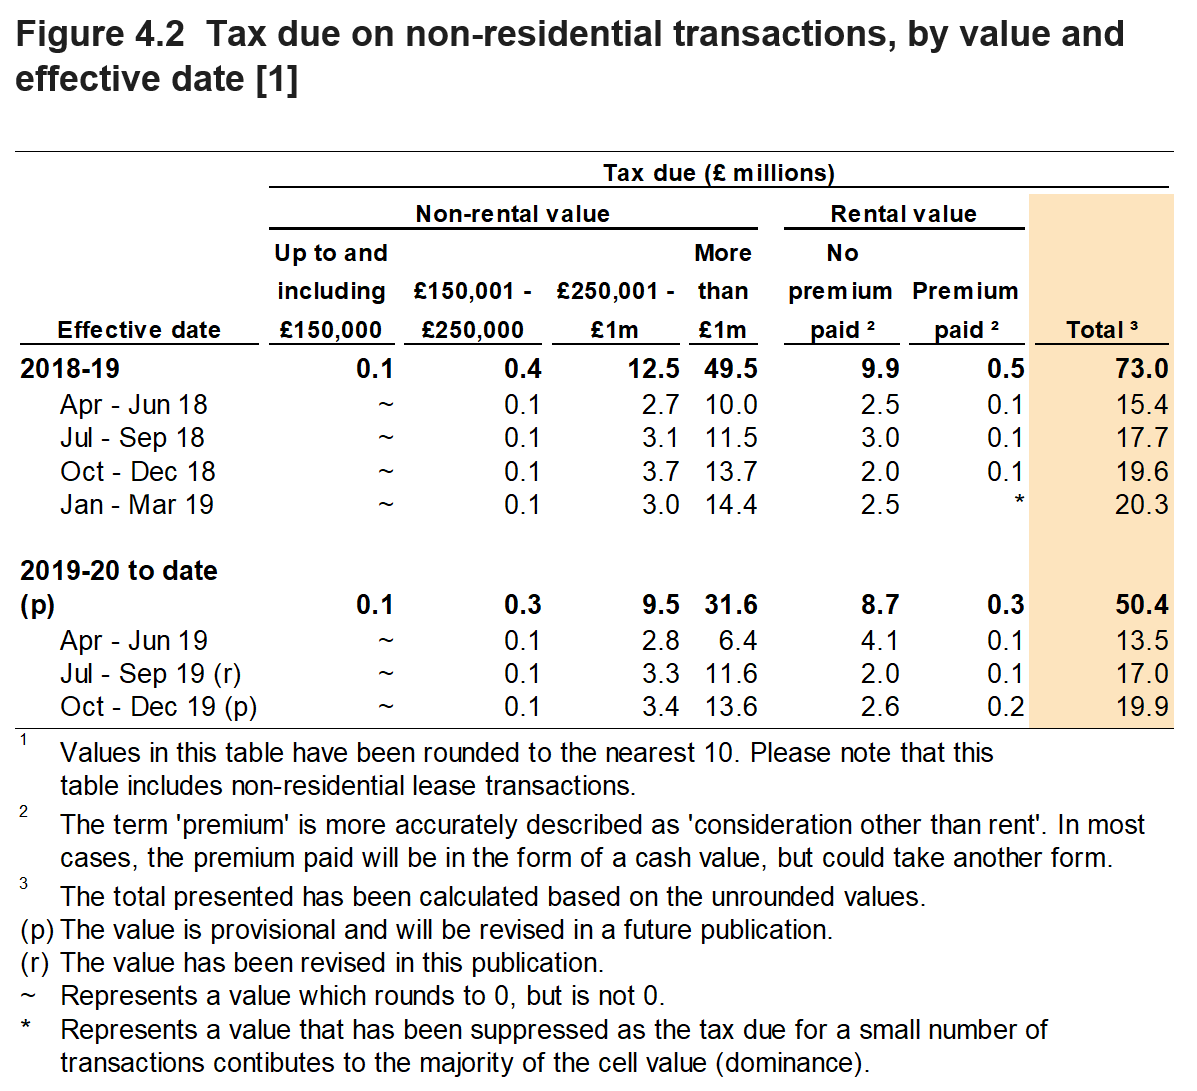 Figure 4.2 shows the amount of tax due on non-residential transactions by value of the property. Data is shown for the year and quarter in which the transaction was effective.